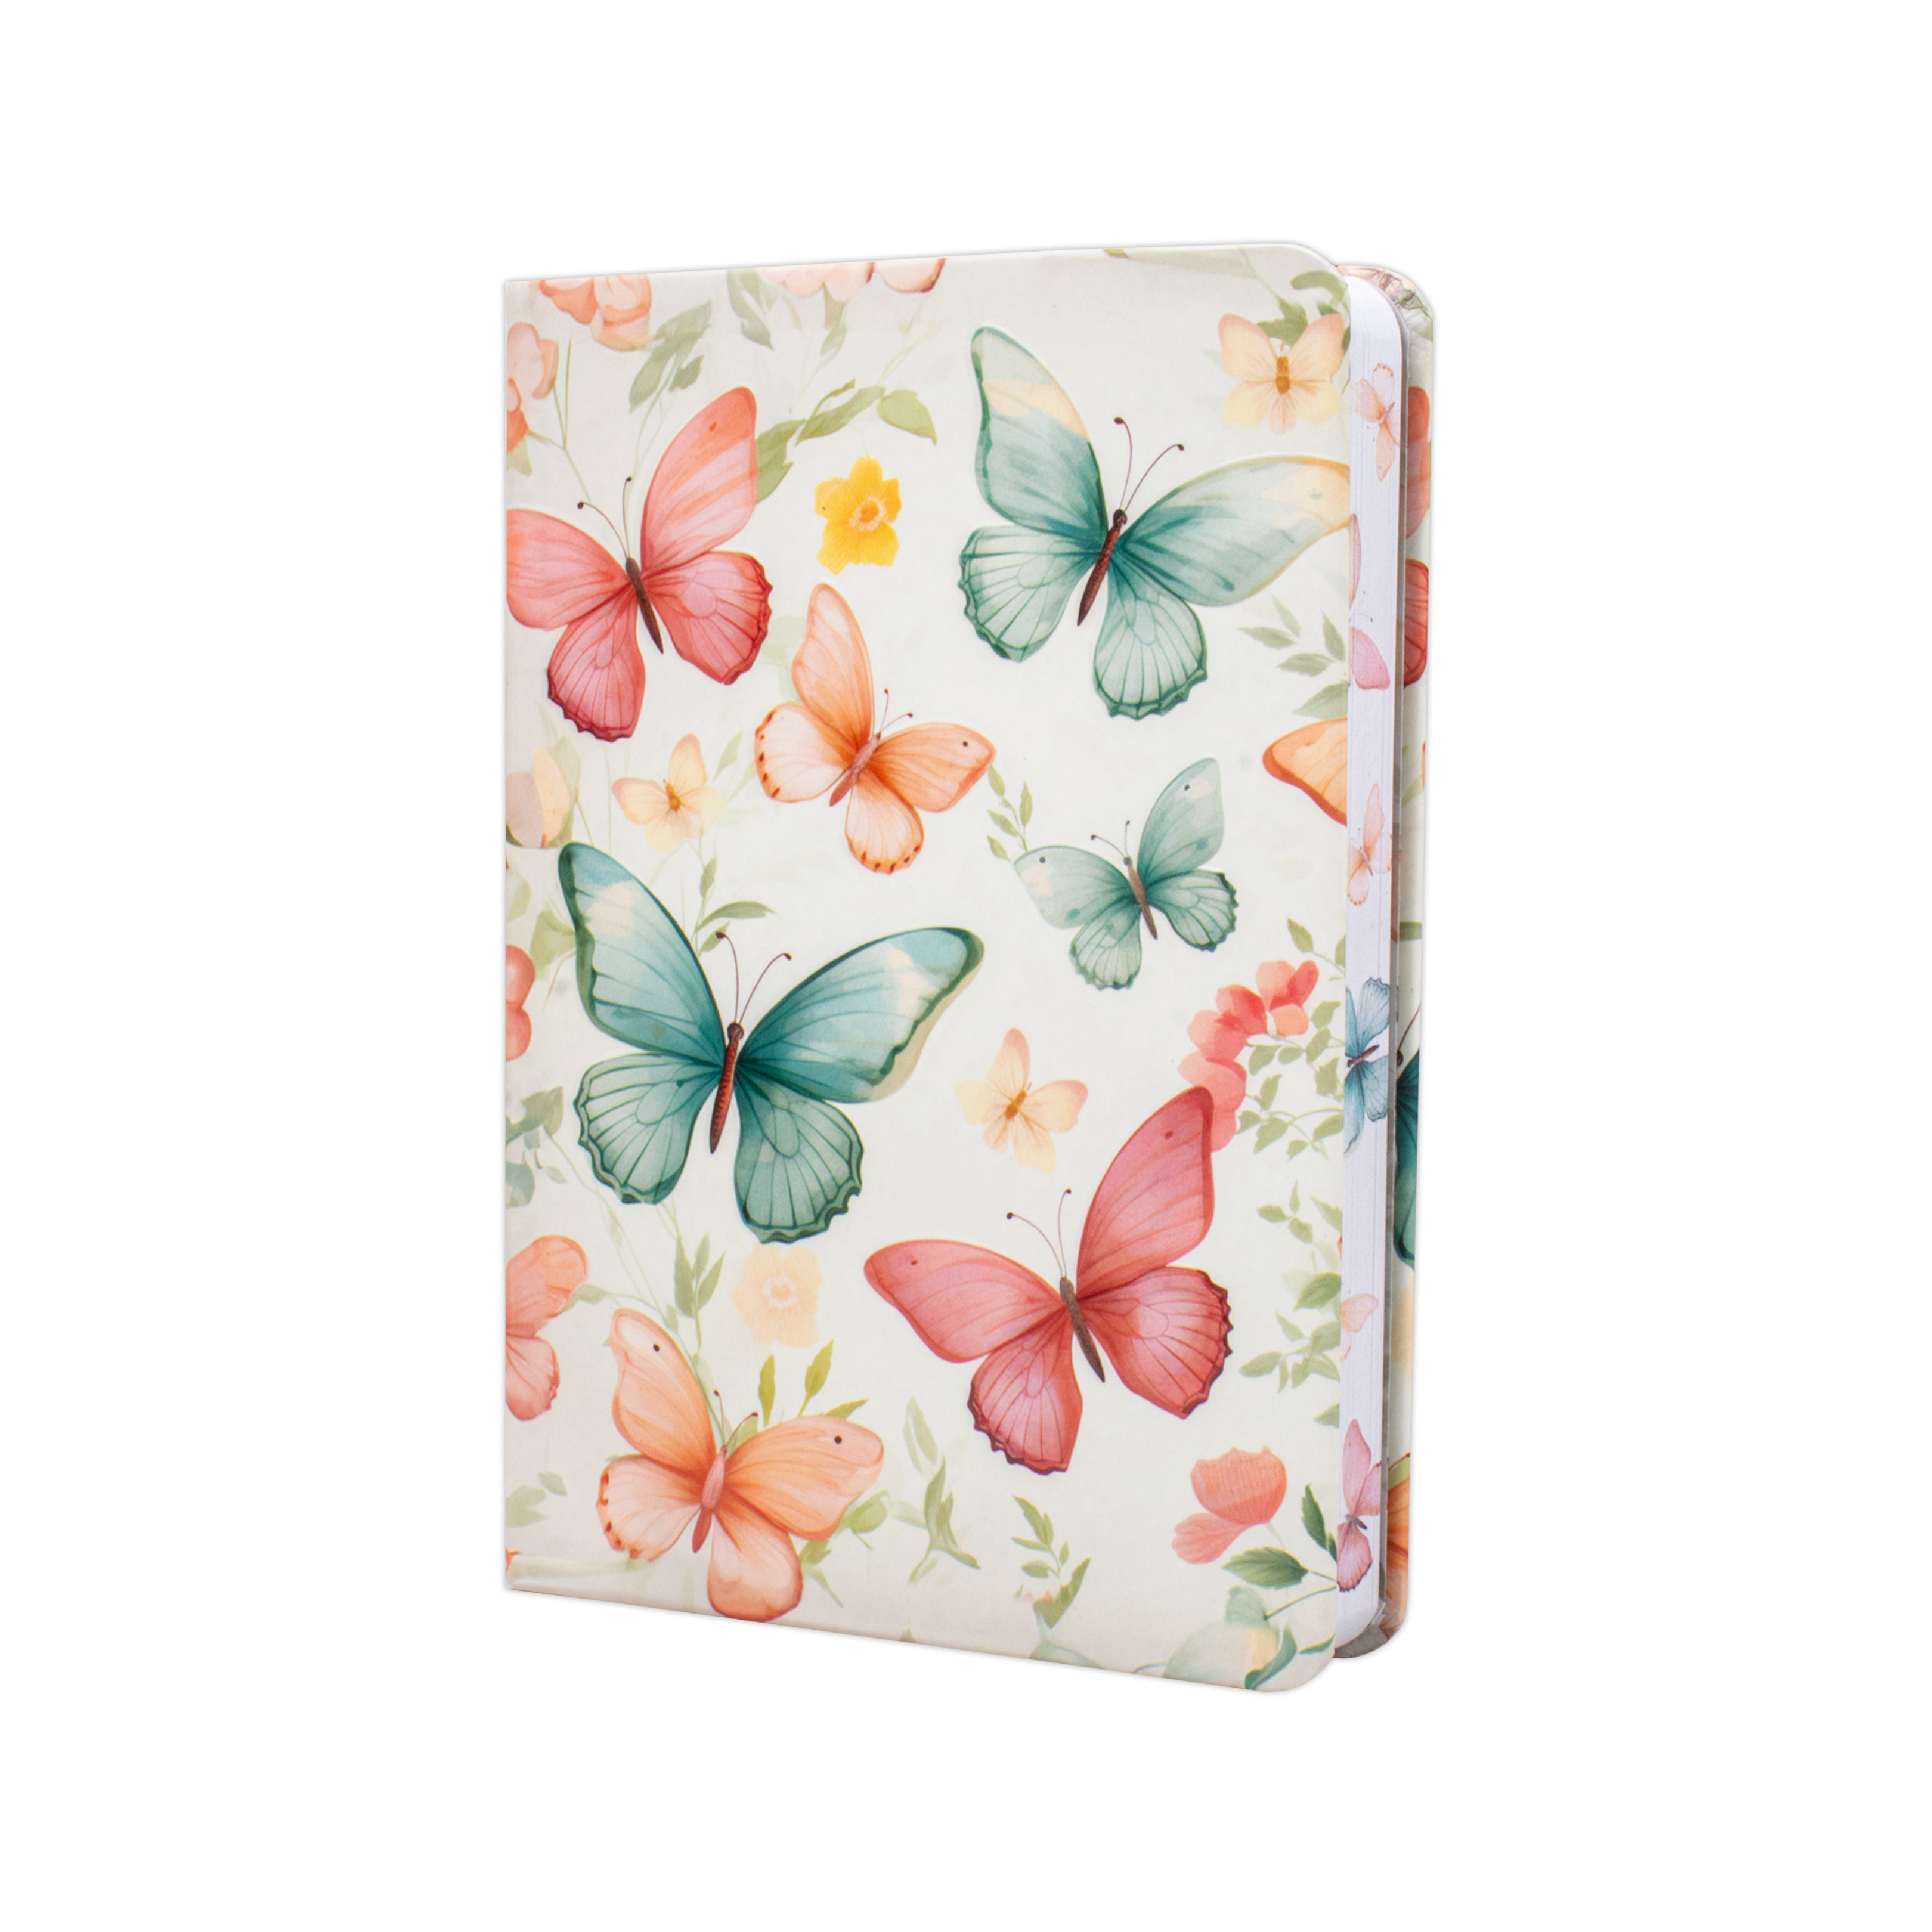 Hardbound Ruled Notebook Butterfly Garden Edge Printed With Elastic Band A6 192pages 100gsm